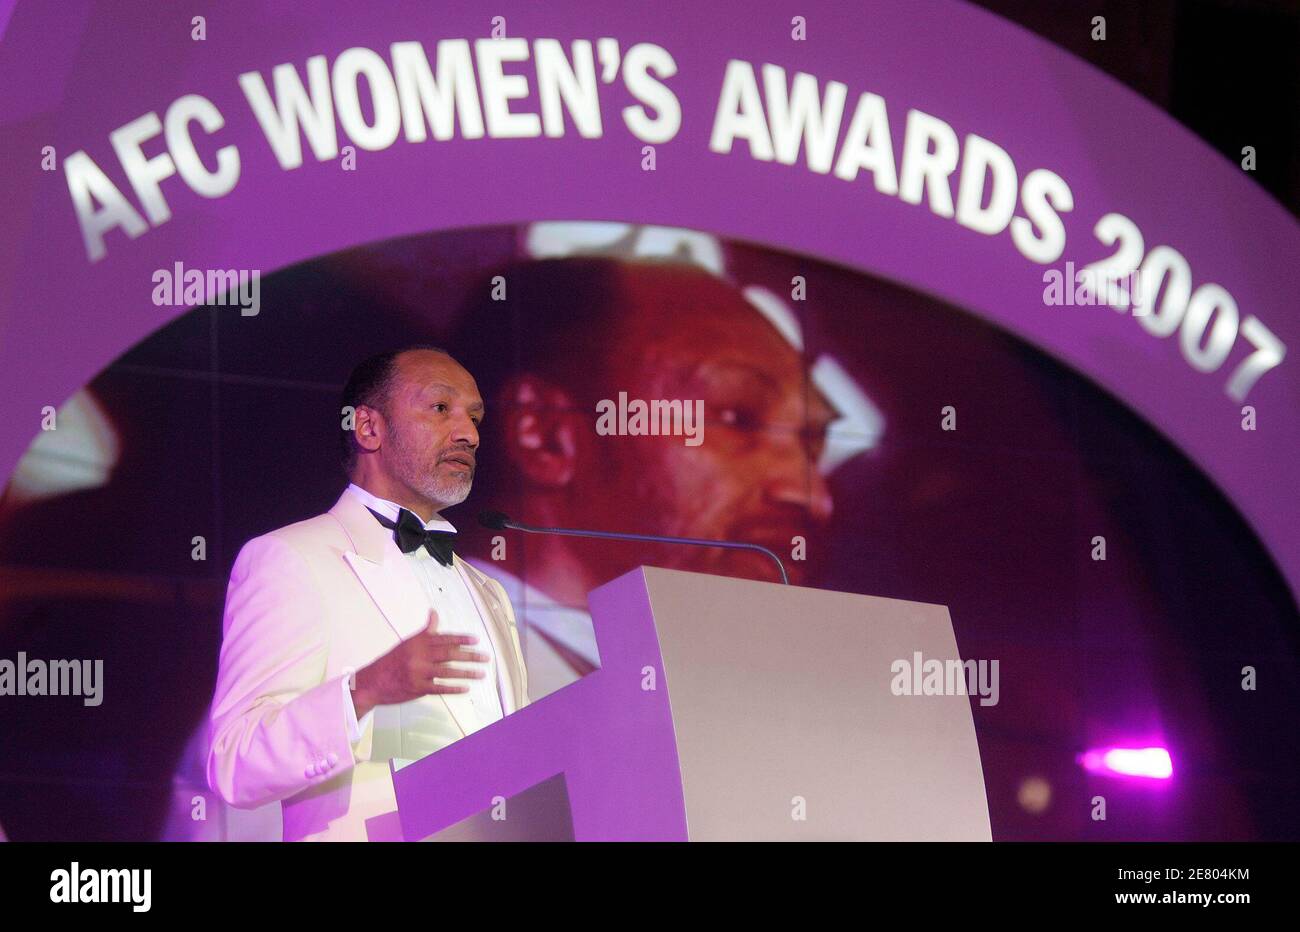 Asian Football Confederation (AFC) President Mohamed Bin Hammam delivers his speech during AFC Women's Player of the Year awards in Kuala Lumpur November 6, 2007. REUTERS/Zainal Abd Halim (MALAYSIA) Stock Photo